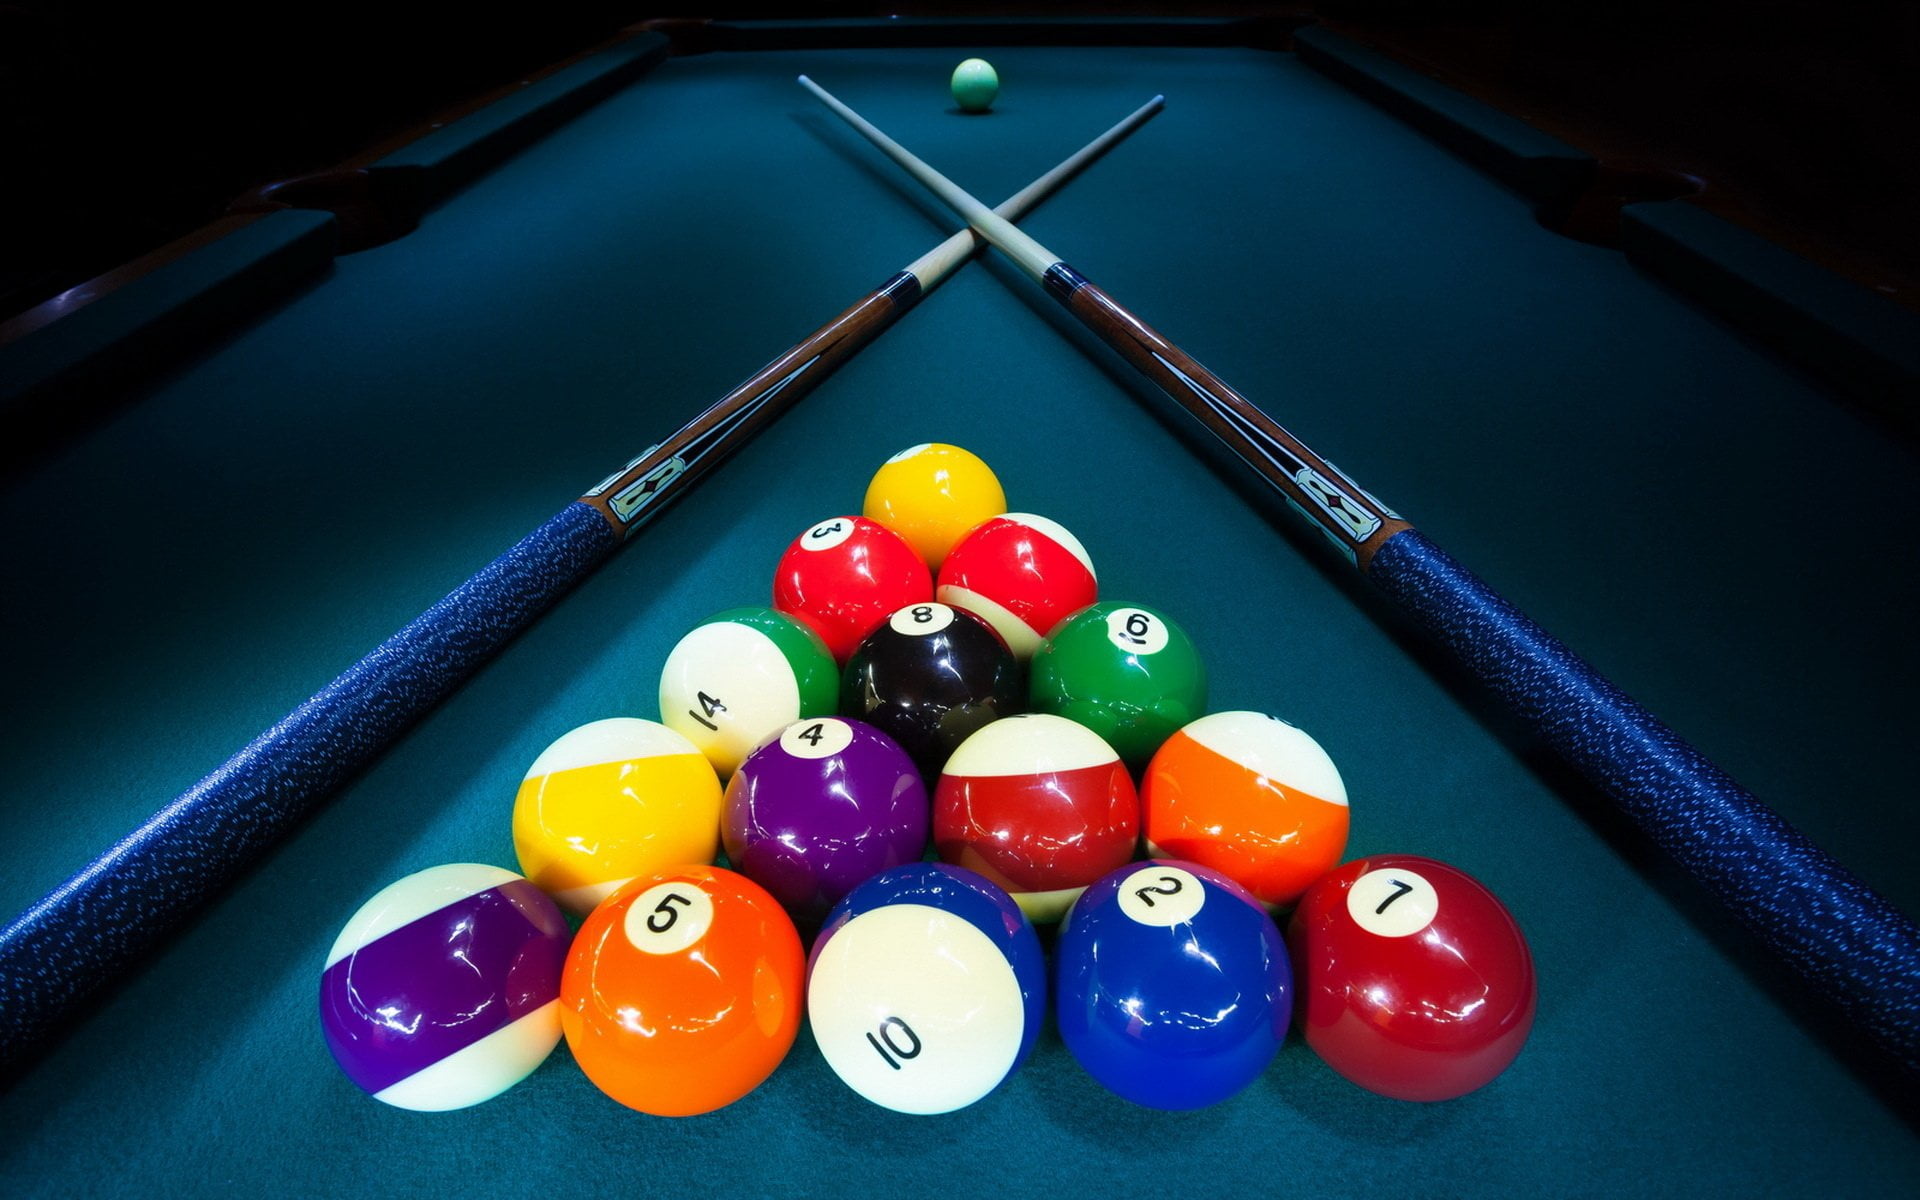 Game, Pool, pool ball, pool table, pool - cue sport, leisure activity